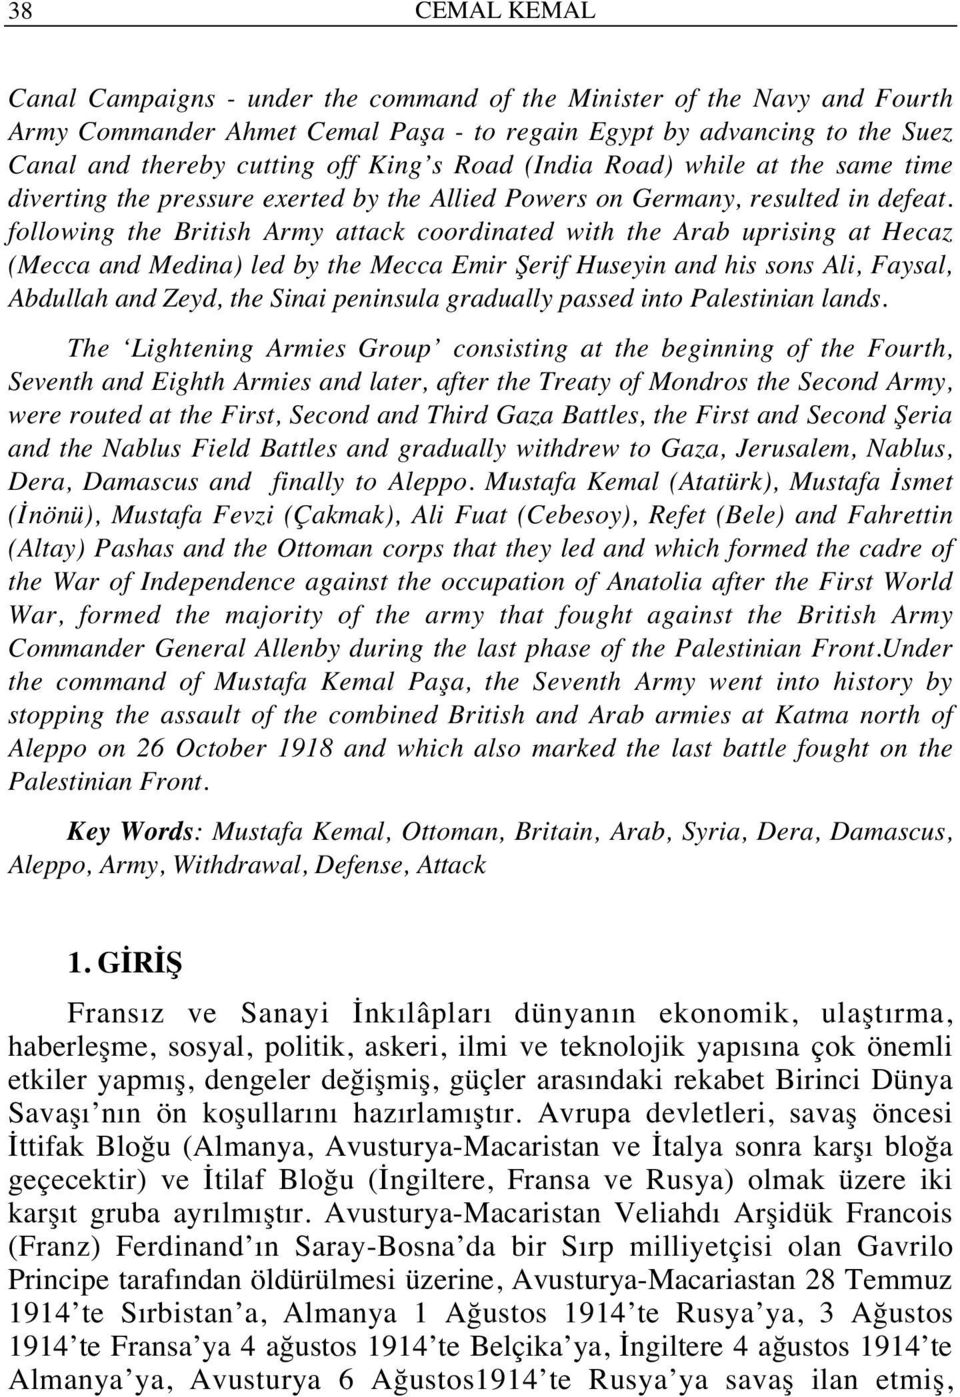 following the British Army attack coordinated with the Arab uprising at Hecaz (Mecca and Medina) led by the Mecca Emir Şerif Huseyin and his sons Ali, Faysal, Abdullah and Zeyd, the Sinai peninsula